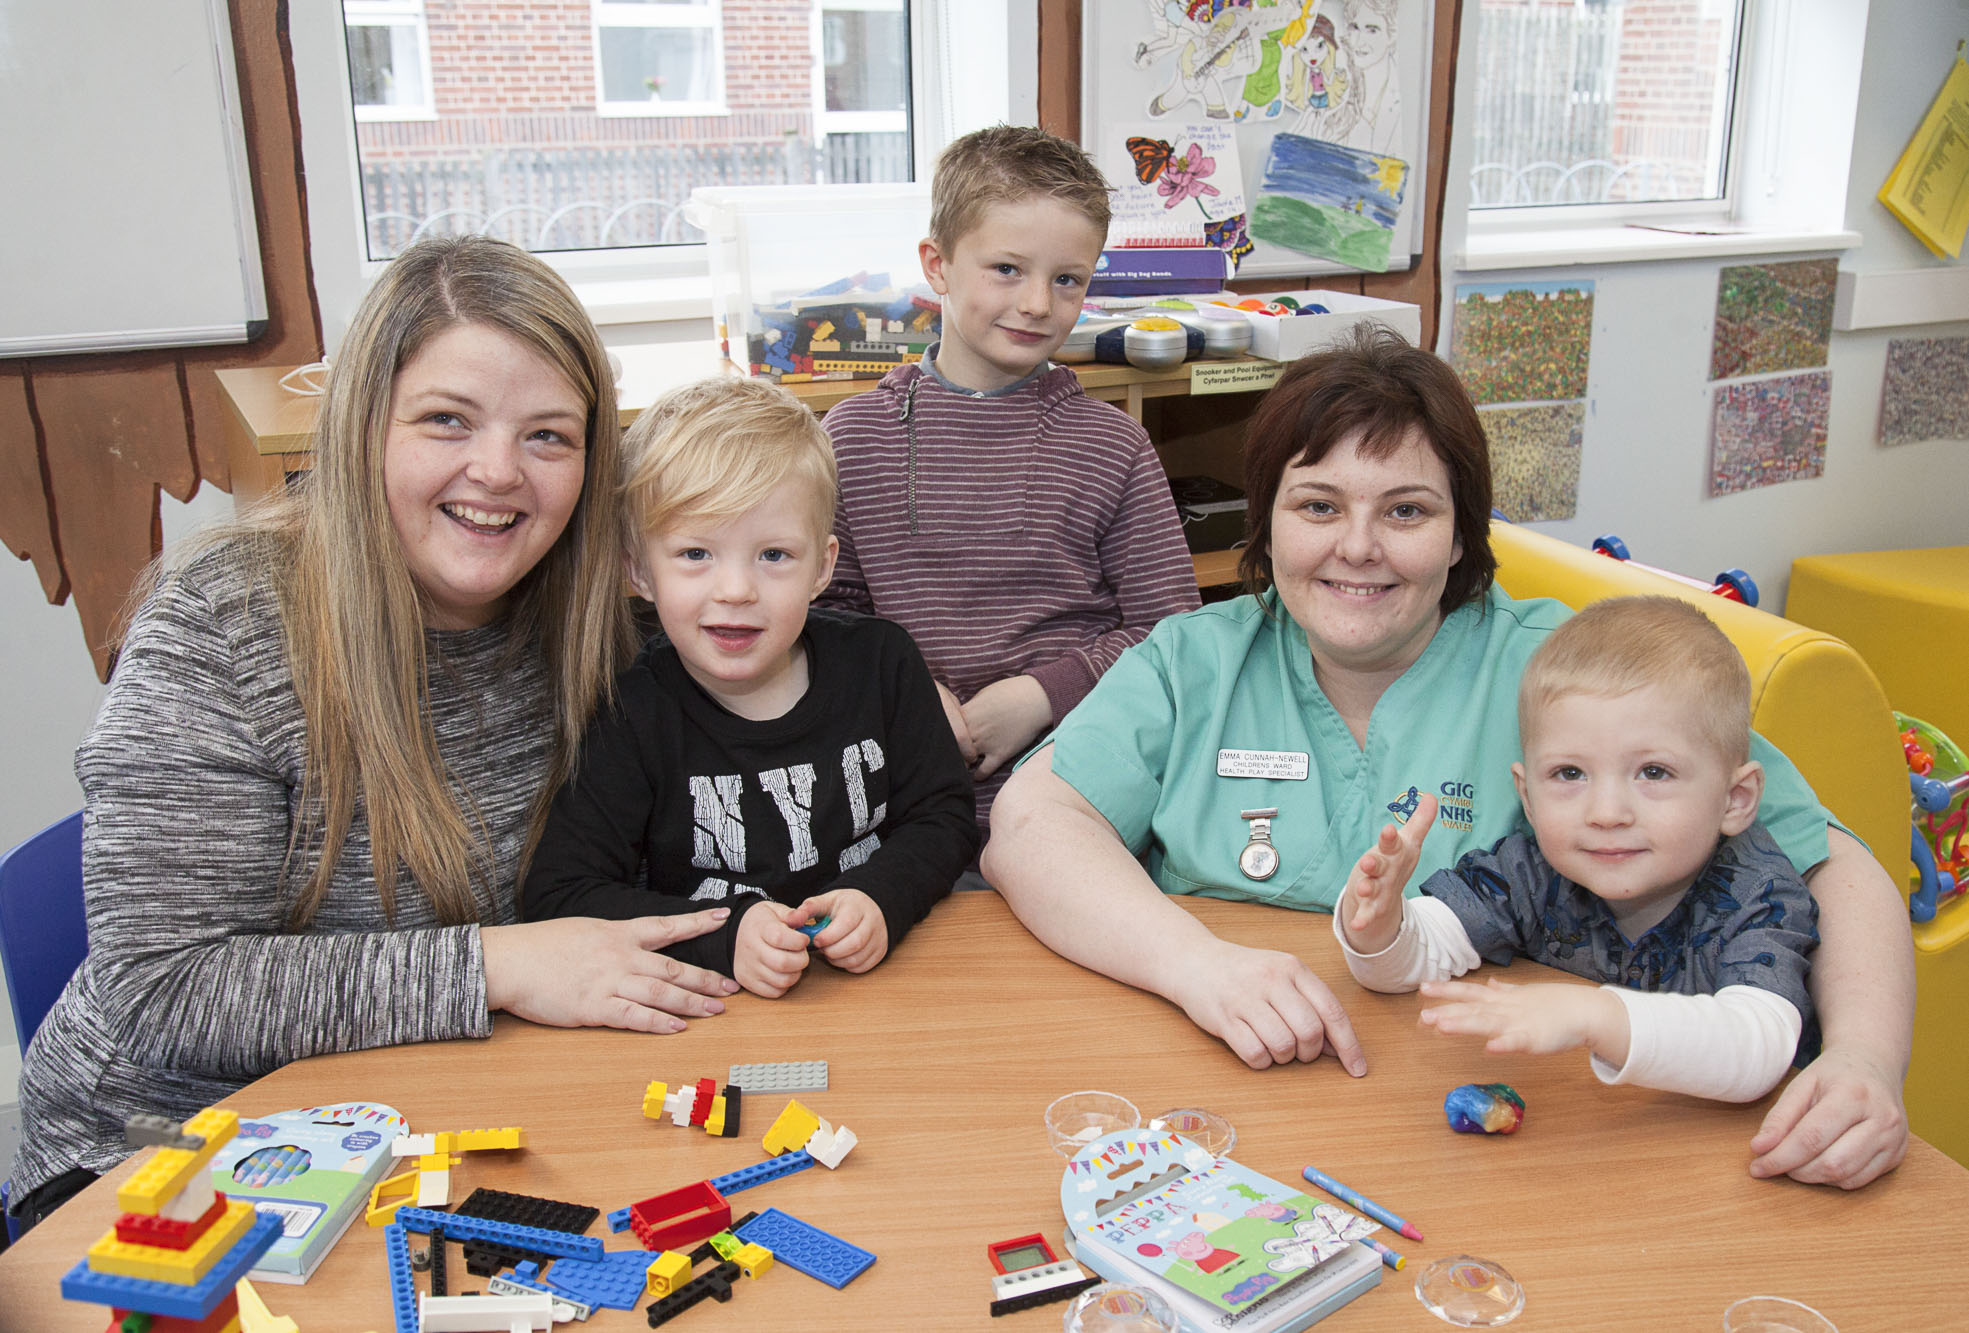 Grateful mum says big thank you to Wrexham medical team for caring for her three children